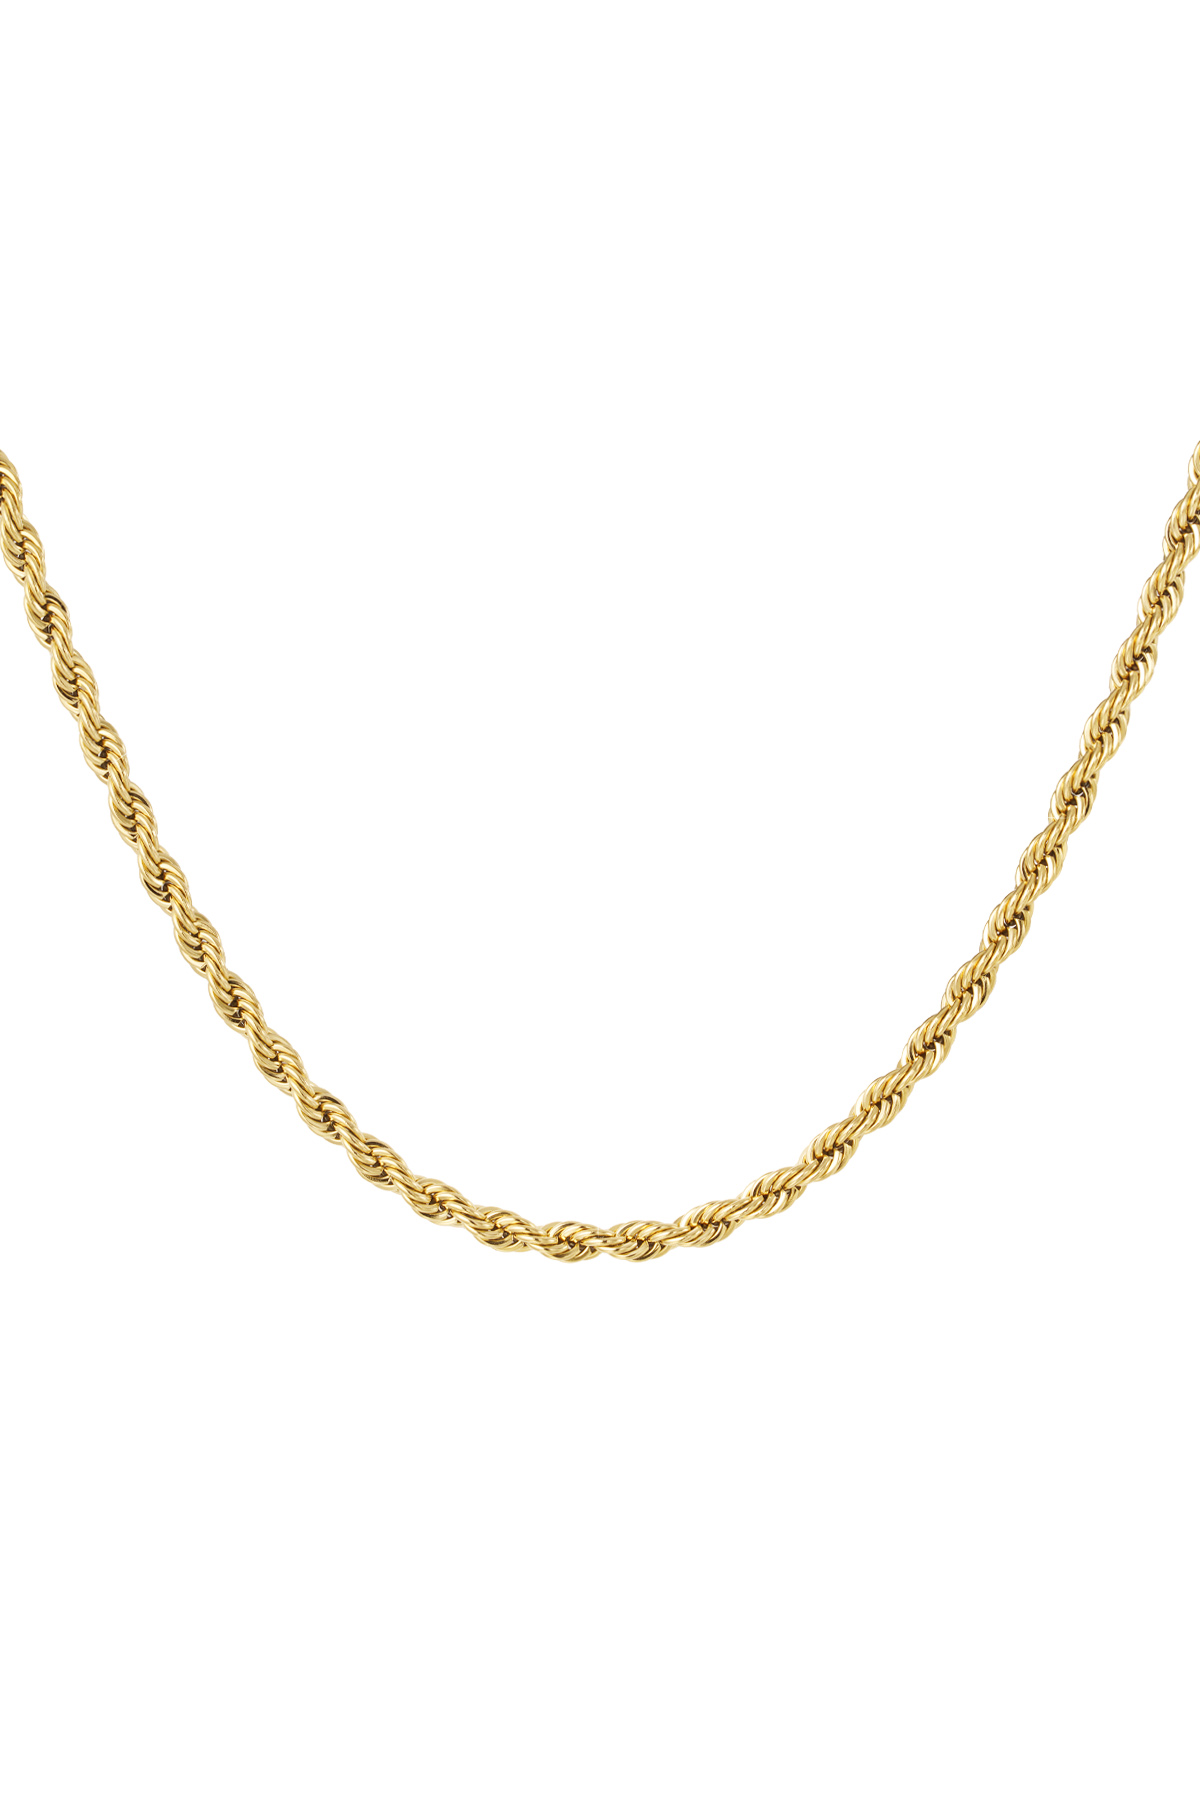 Unisex necklace twisted - gold